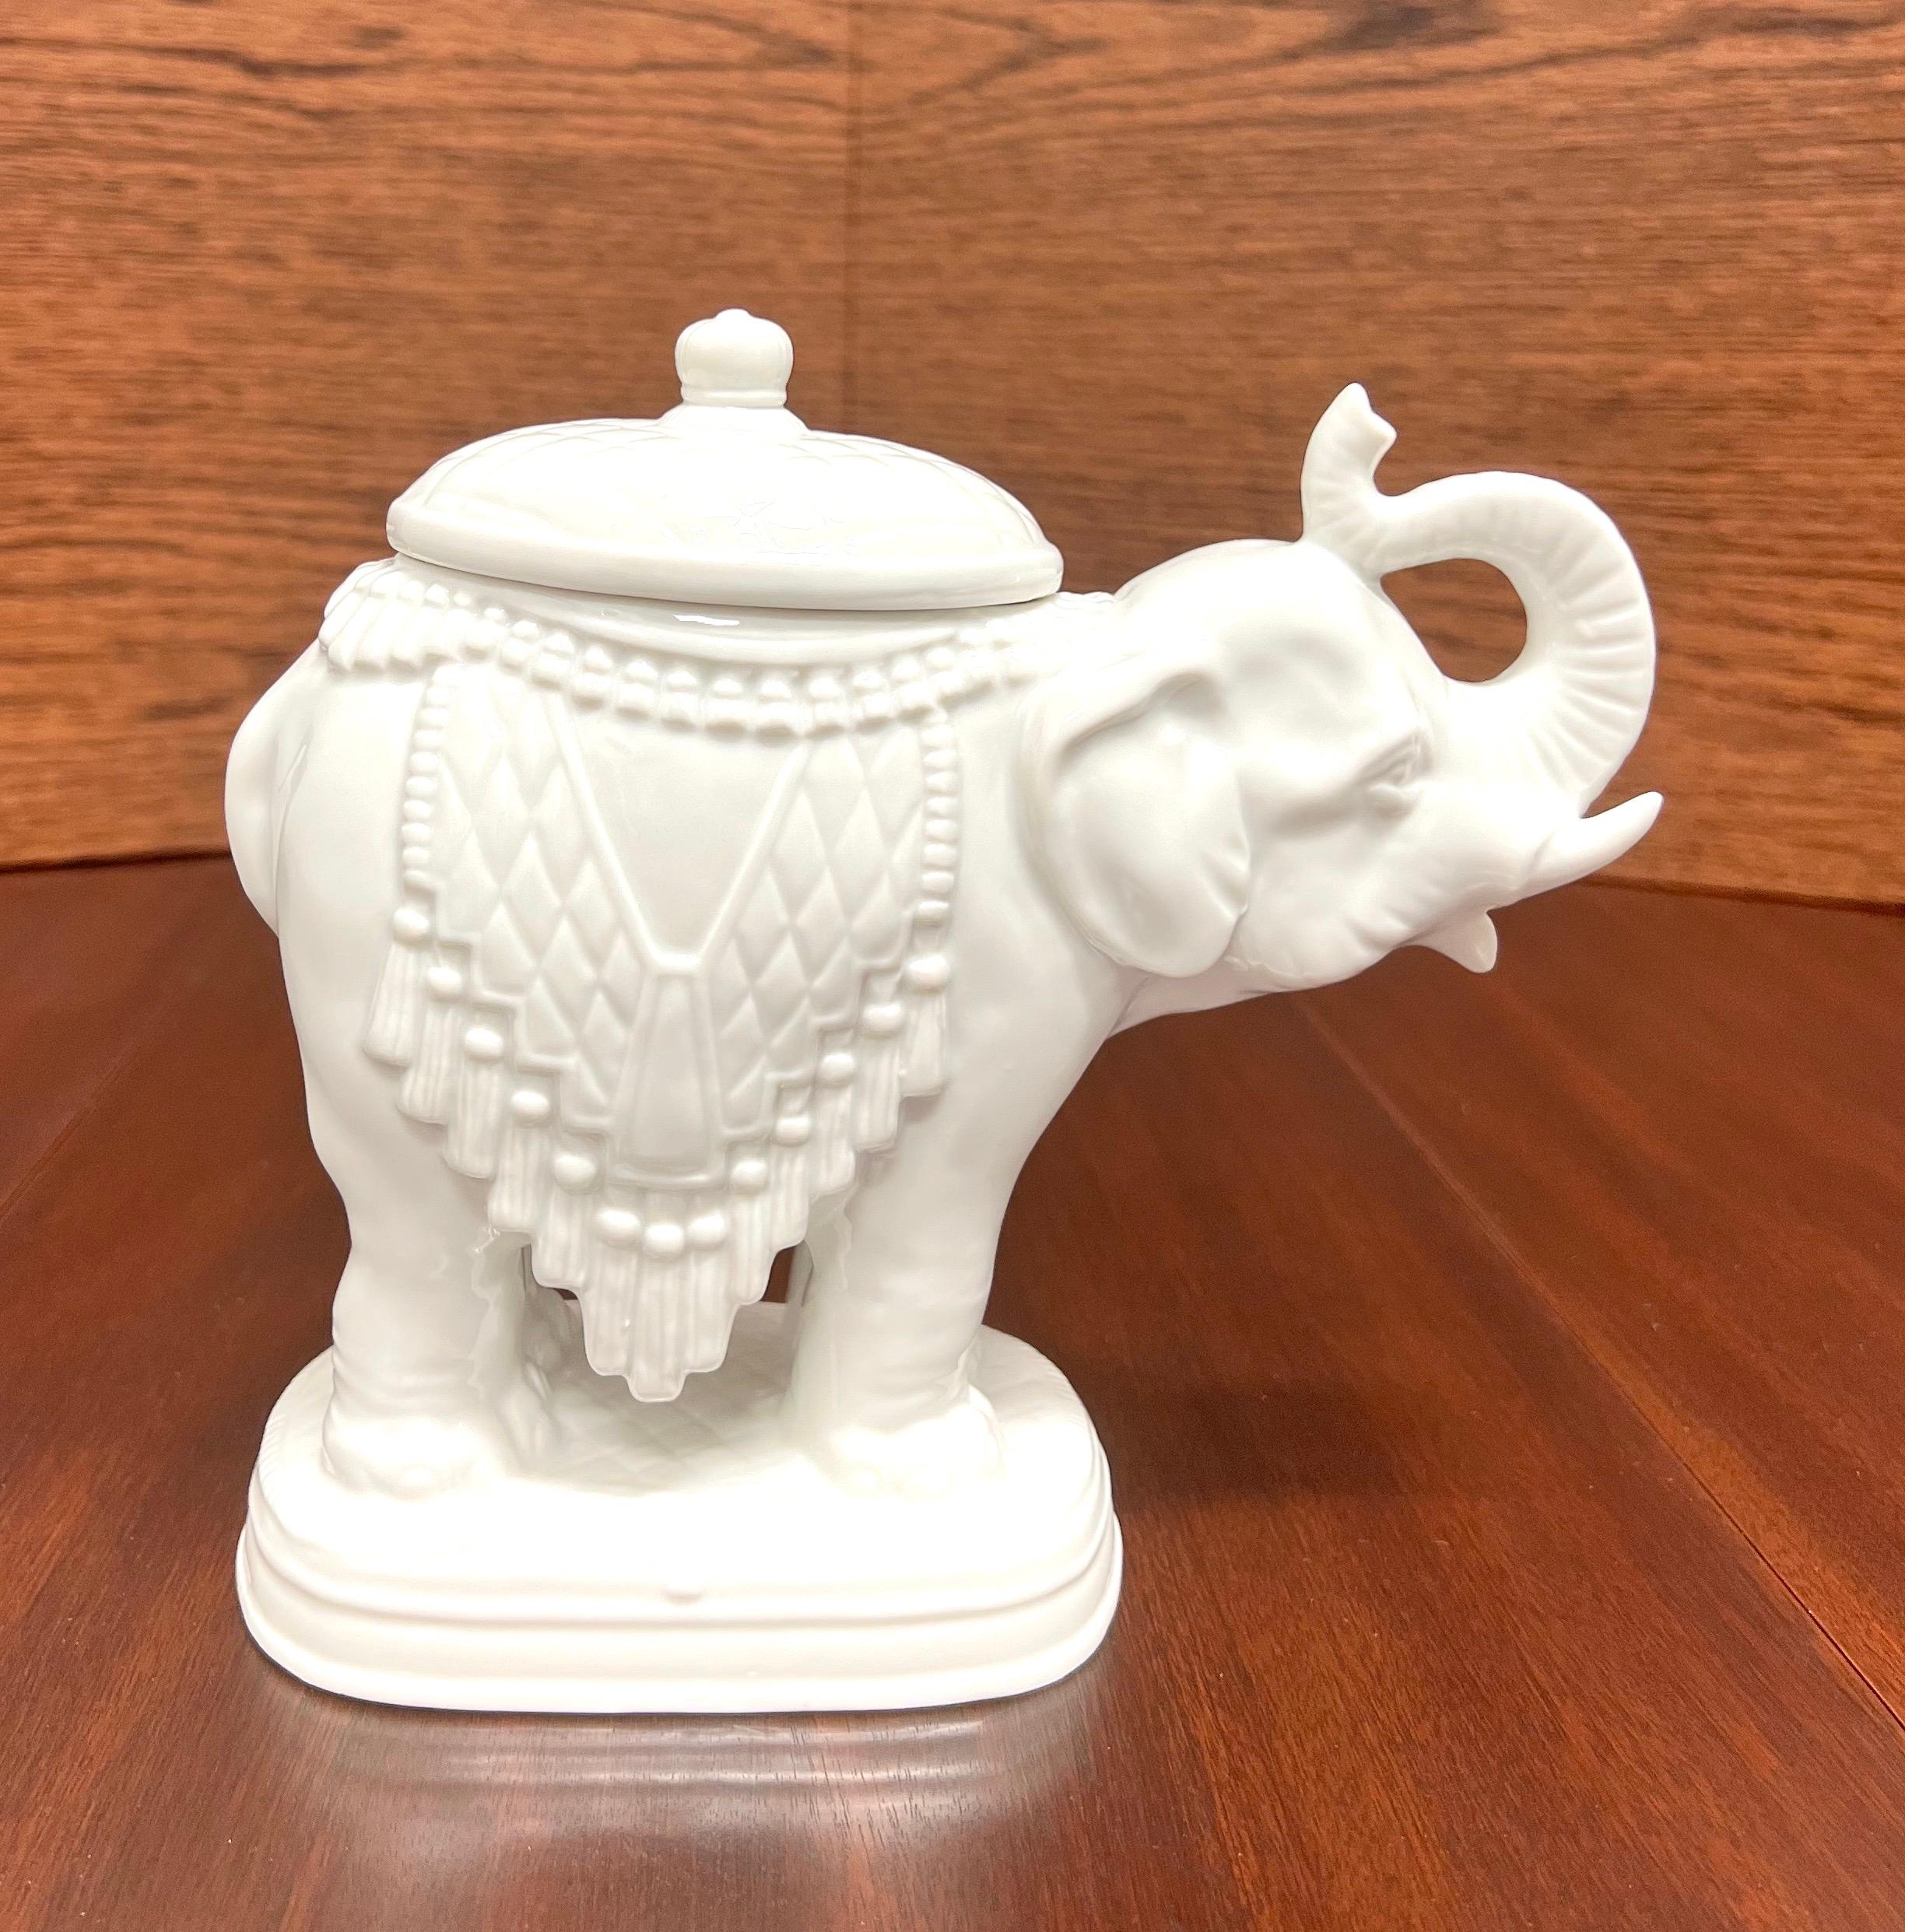 An Asian style candy dish in the shape of an elephant by Andrea by Sadek. Hand painted, white in color glazed porcelain of an Asian elephant with an oval shaped lid. Made in Japan, in the late 20th Century.

Measures:  3.5w 8d 7.5h, Weighs